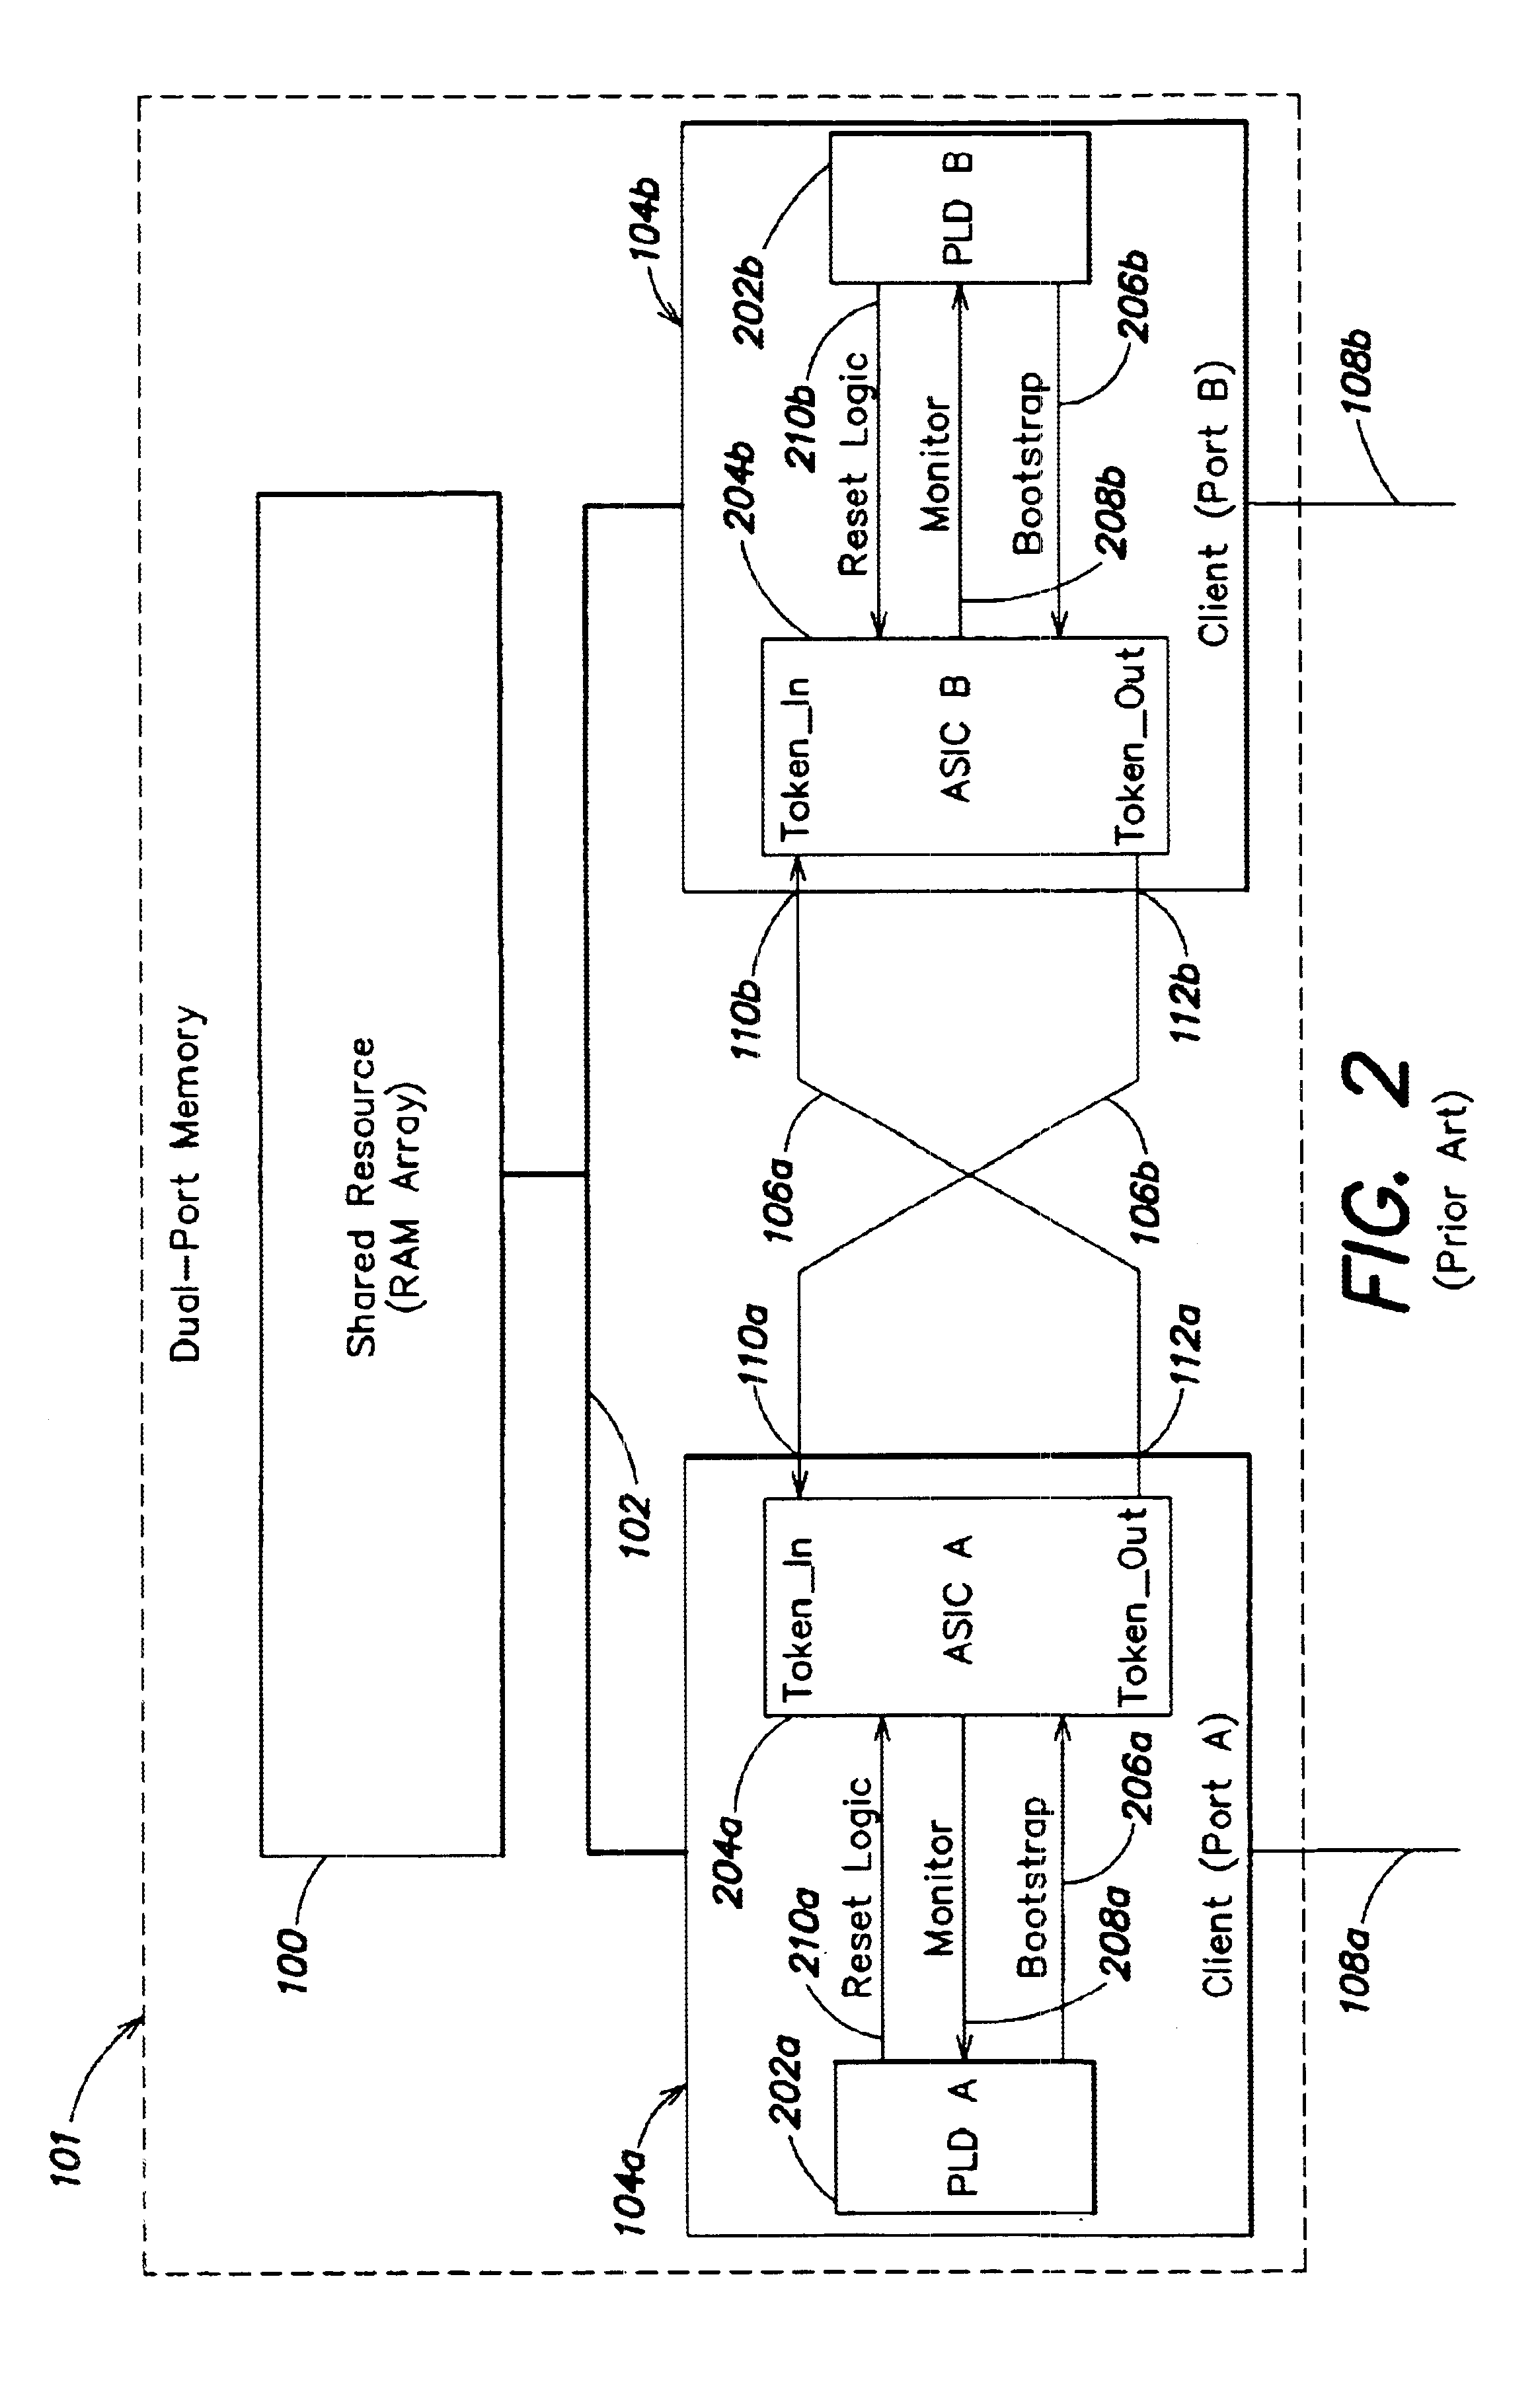 Token exchange system with fault protection